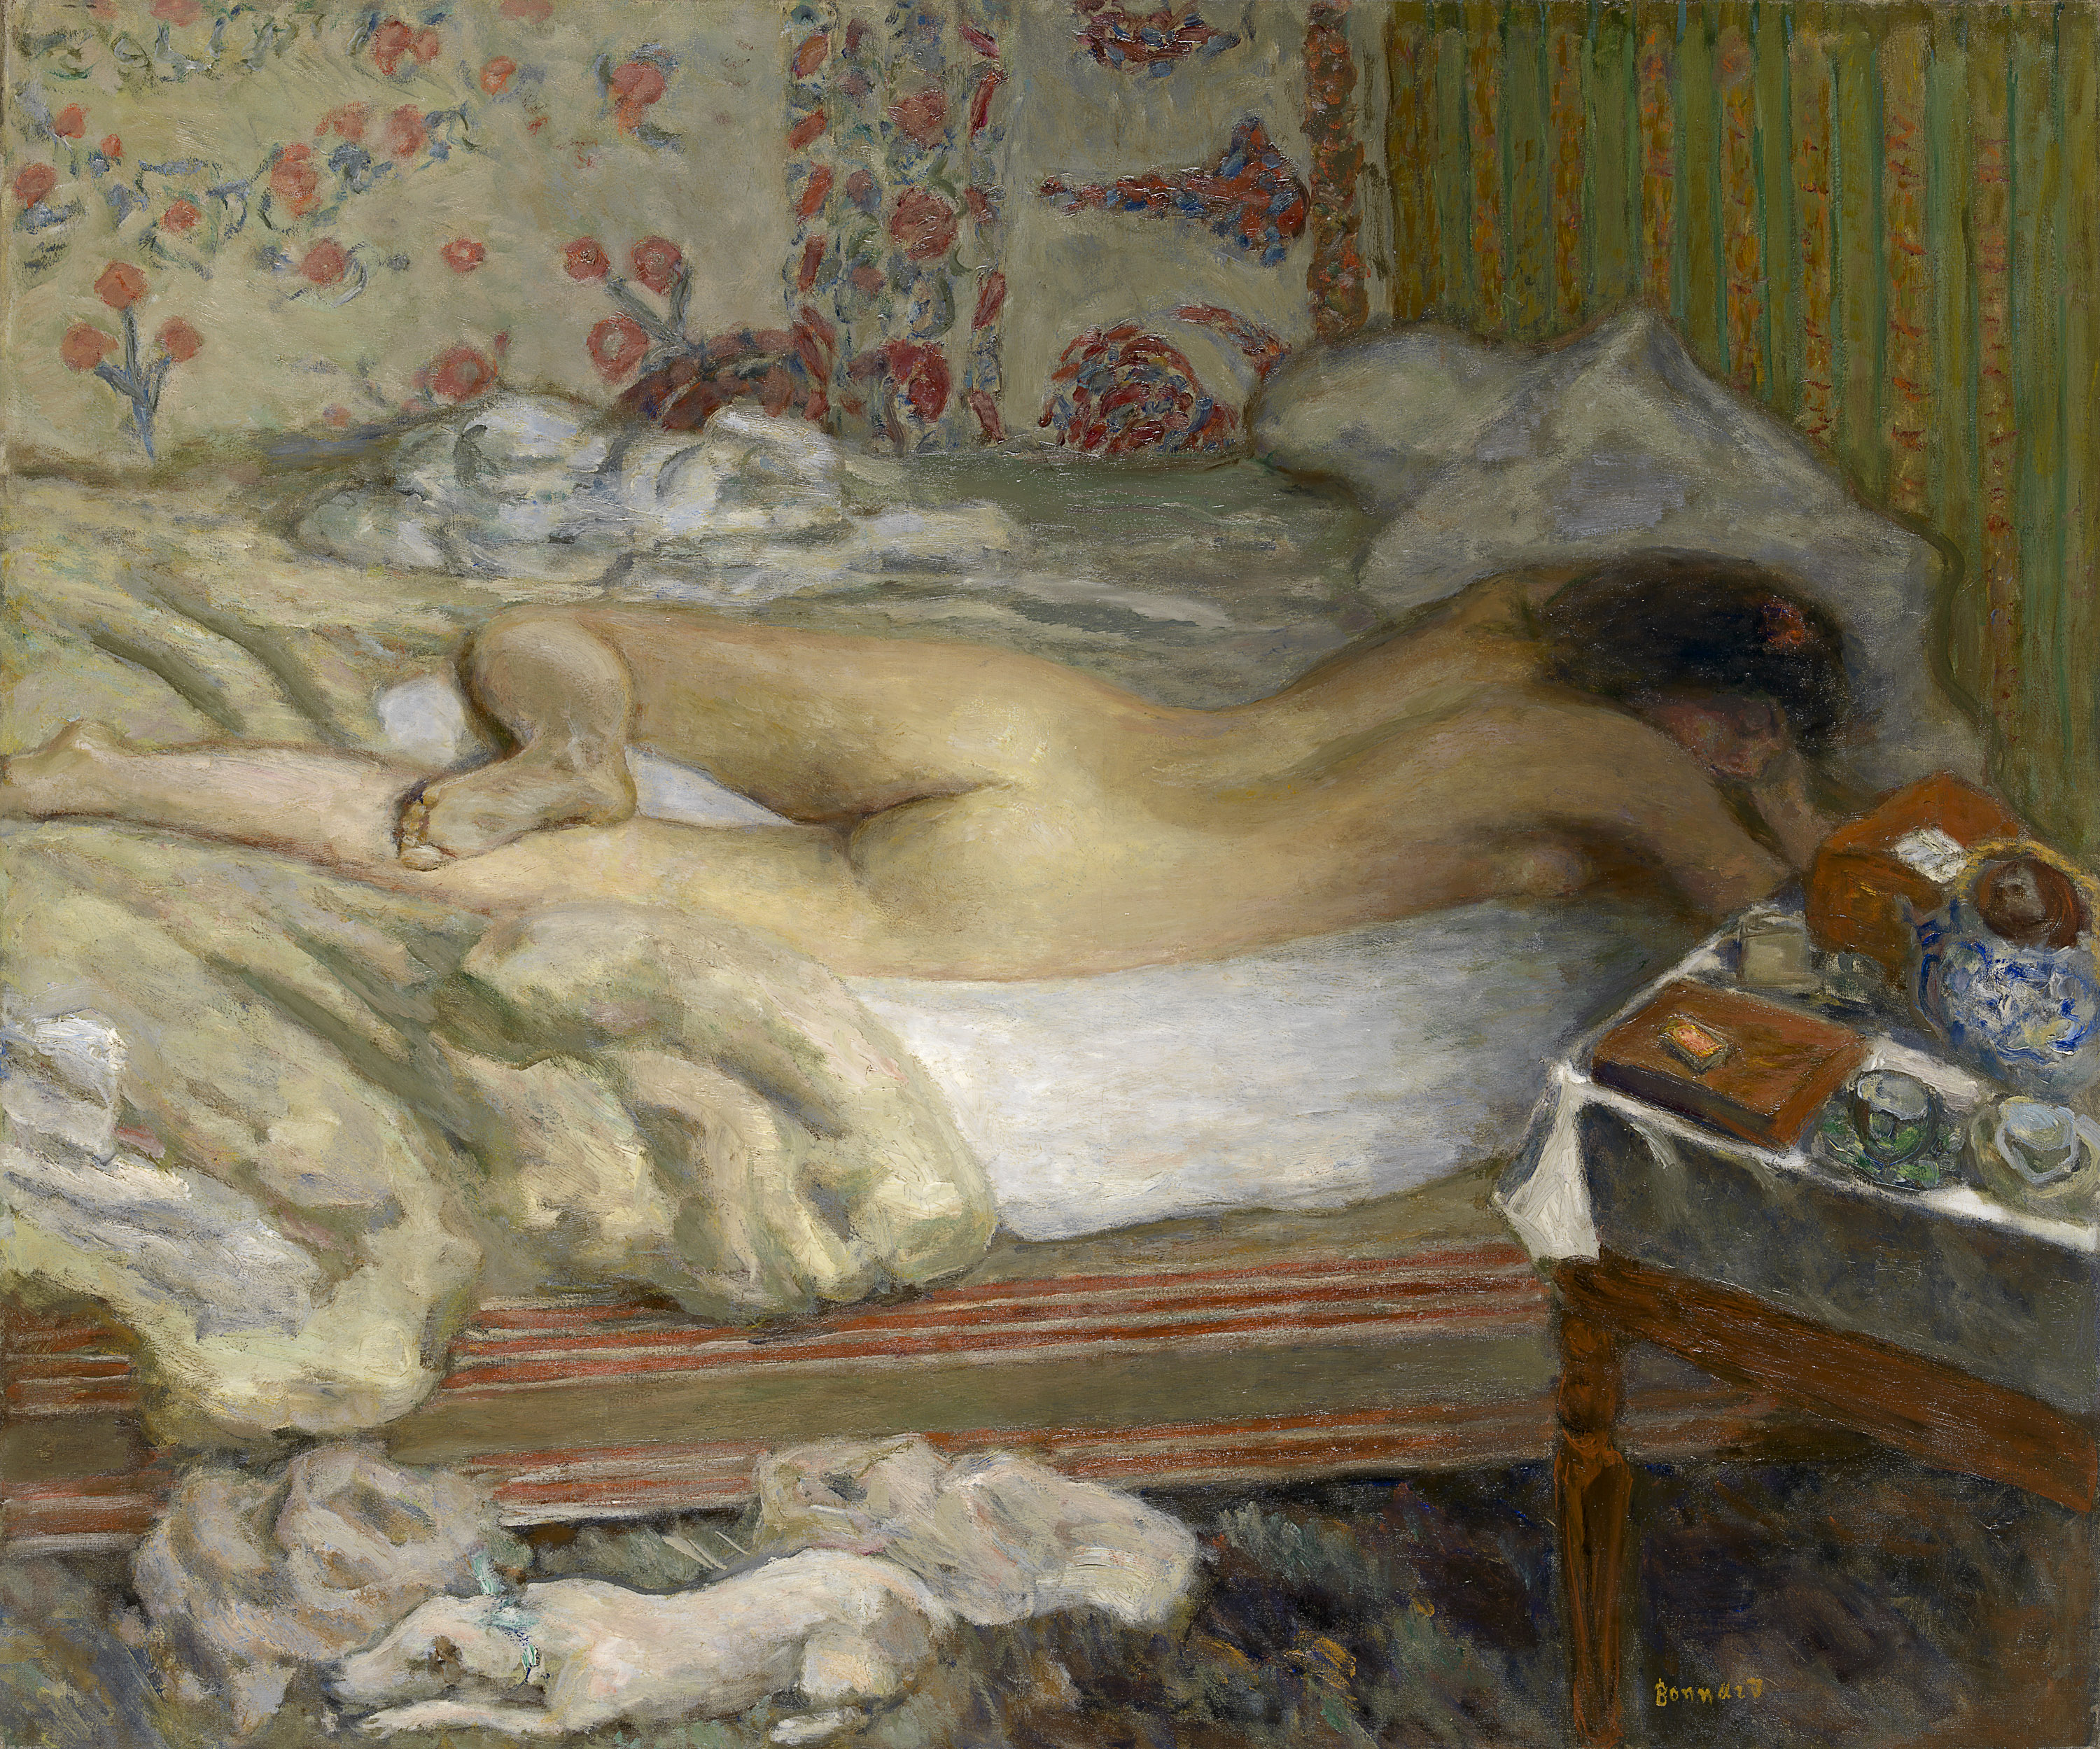 Oil painting showing a woman lying, supine and nude, on a mattress. A small white dog is on the floor.